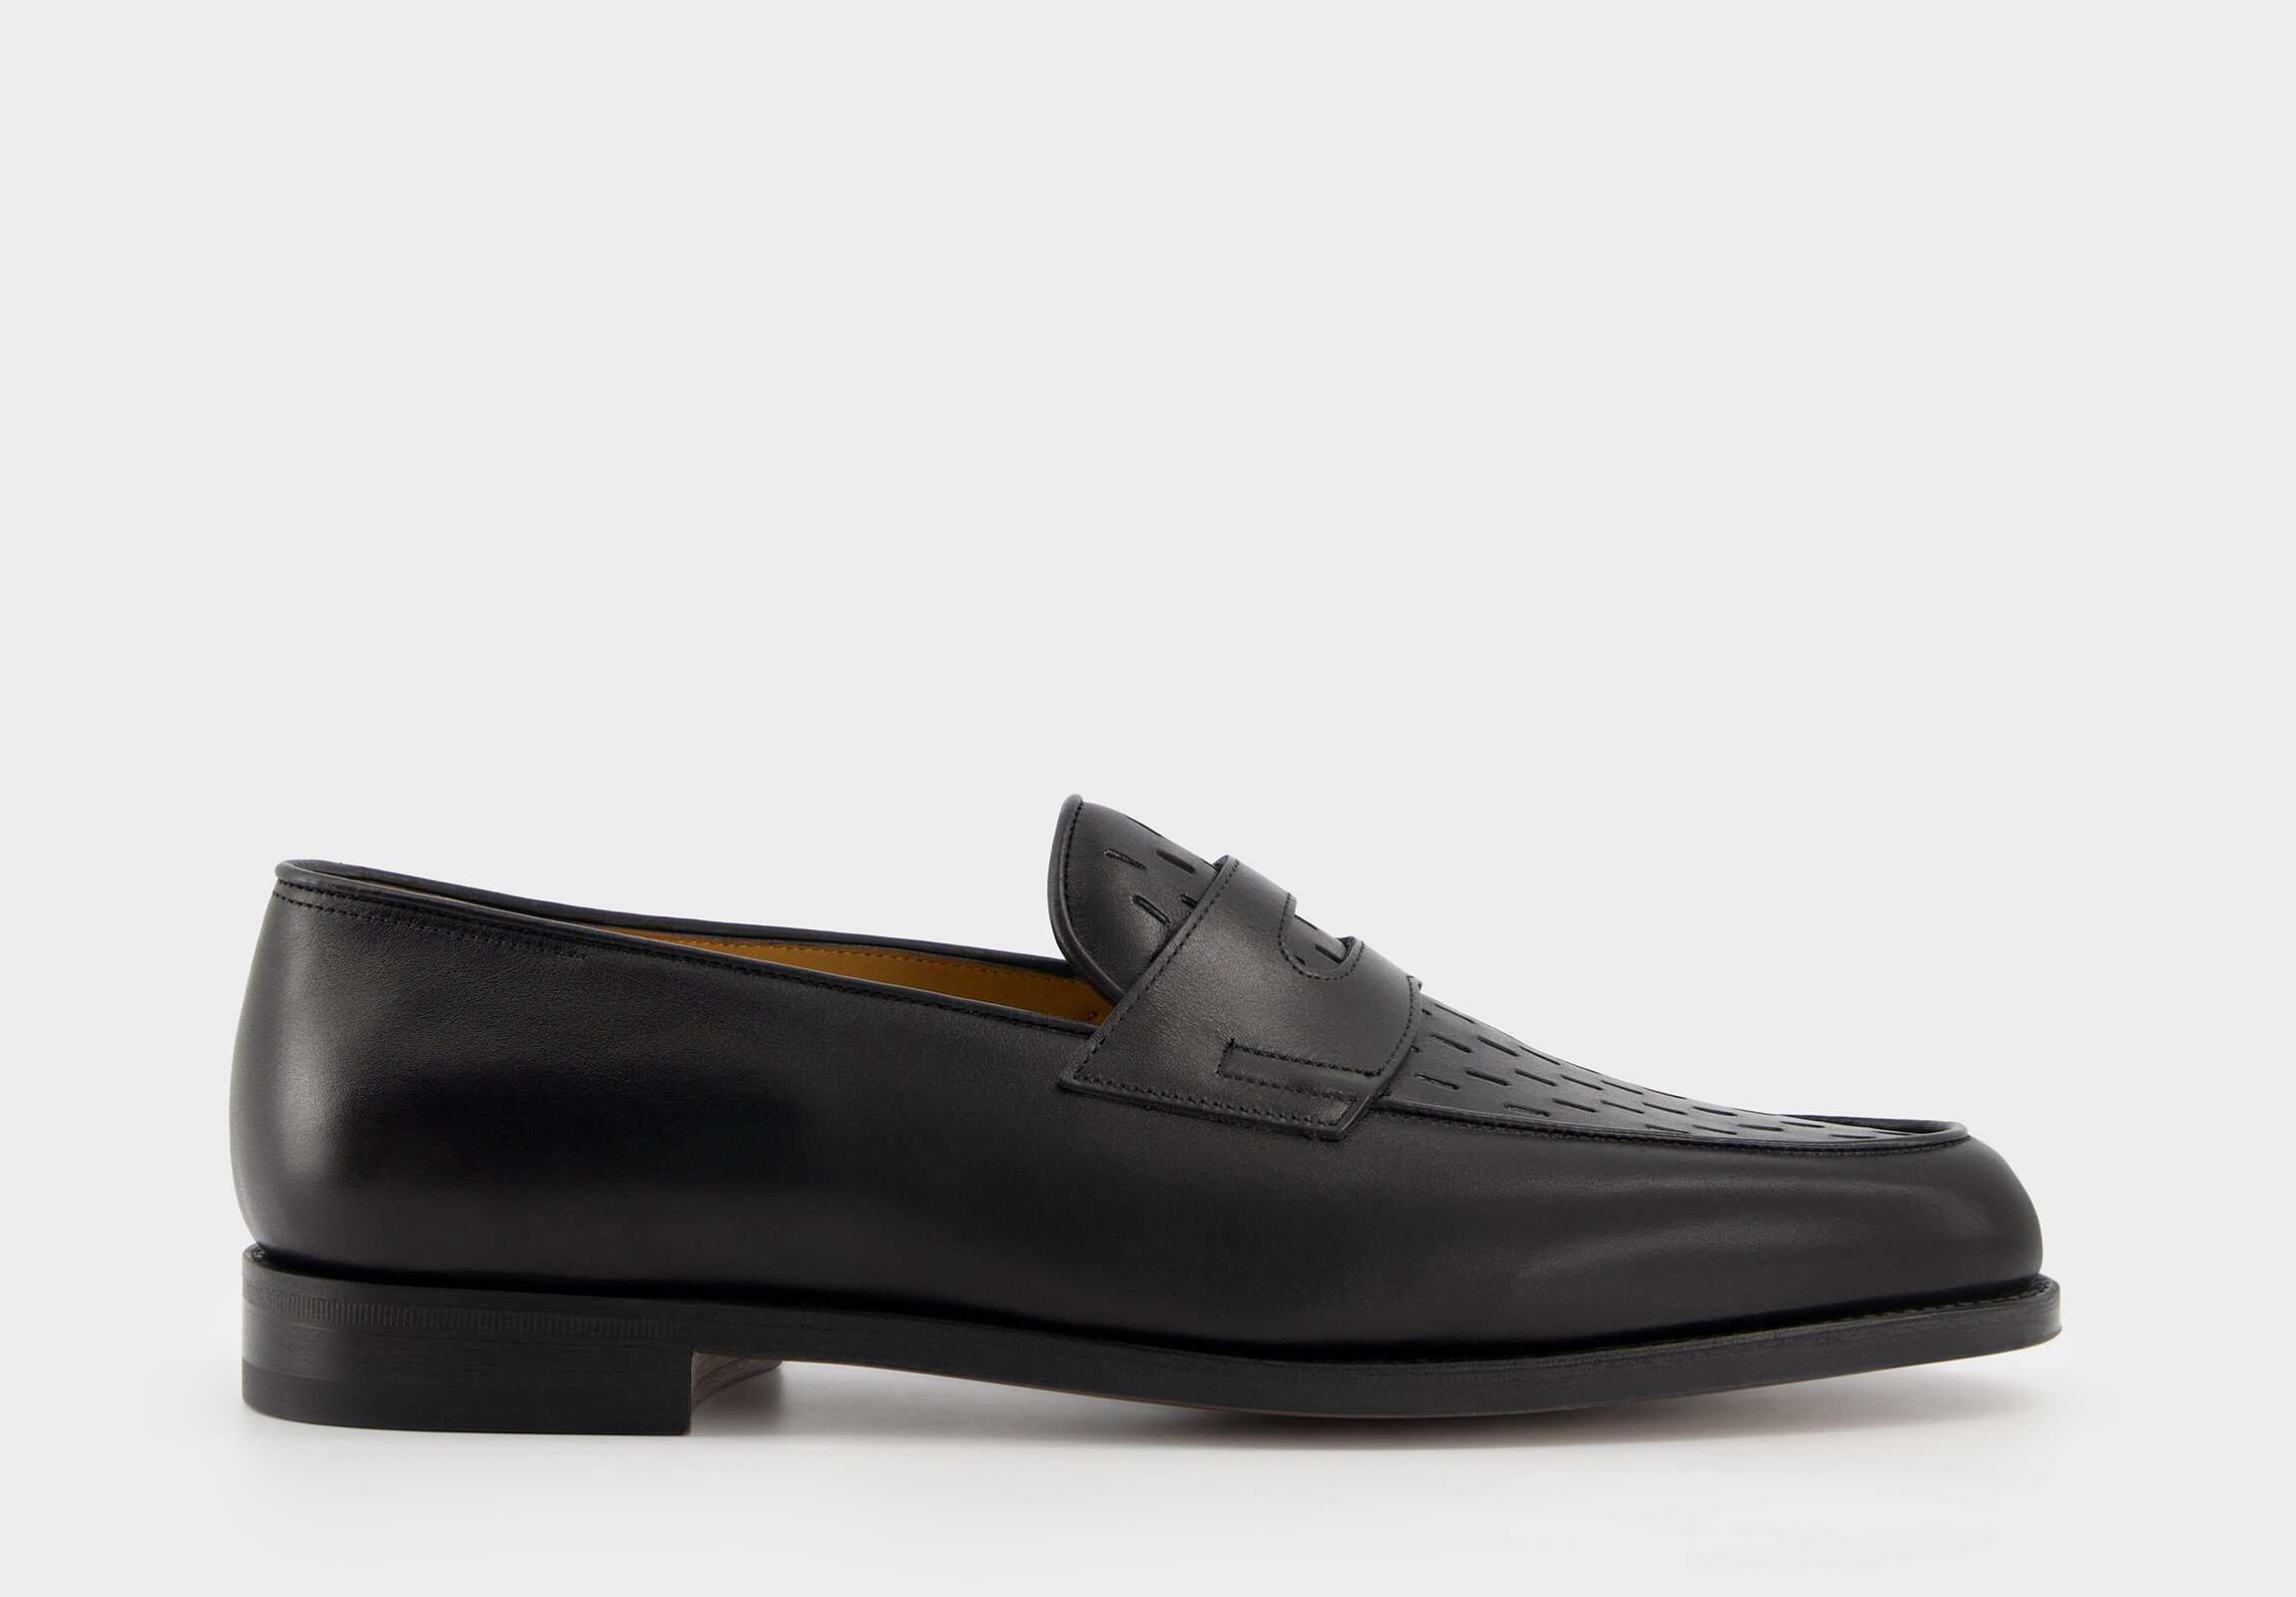 John Lobb | Lopez Oval The whole collection